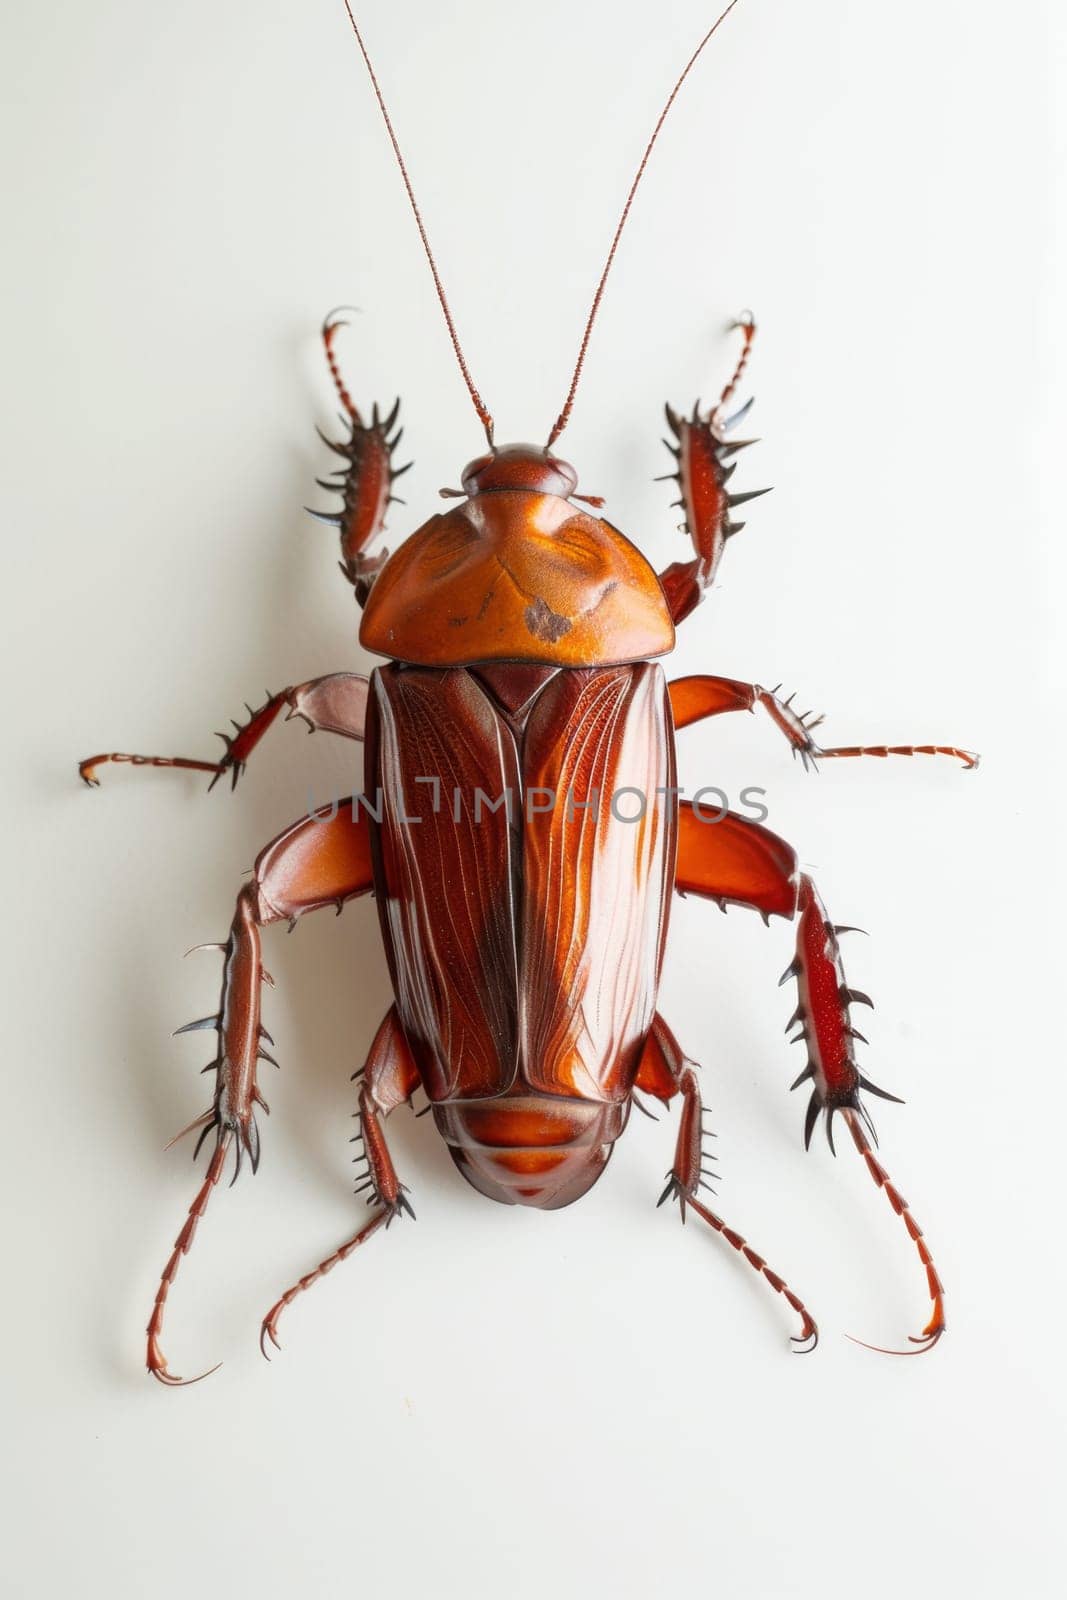 a cockroach highlighted on a white background. Disgusting insect.